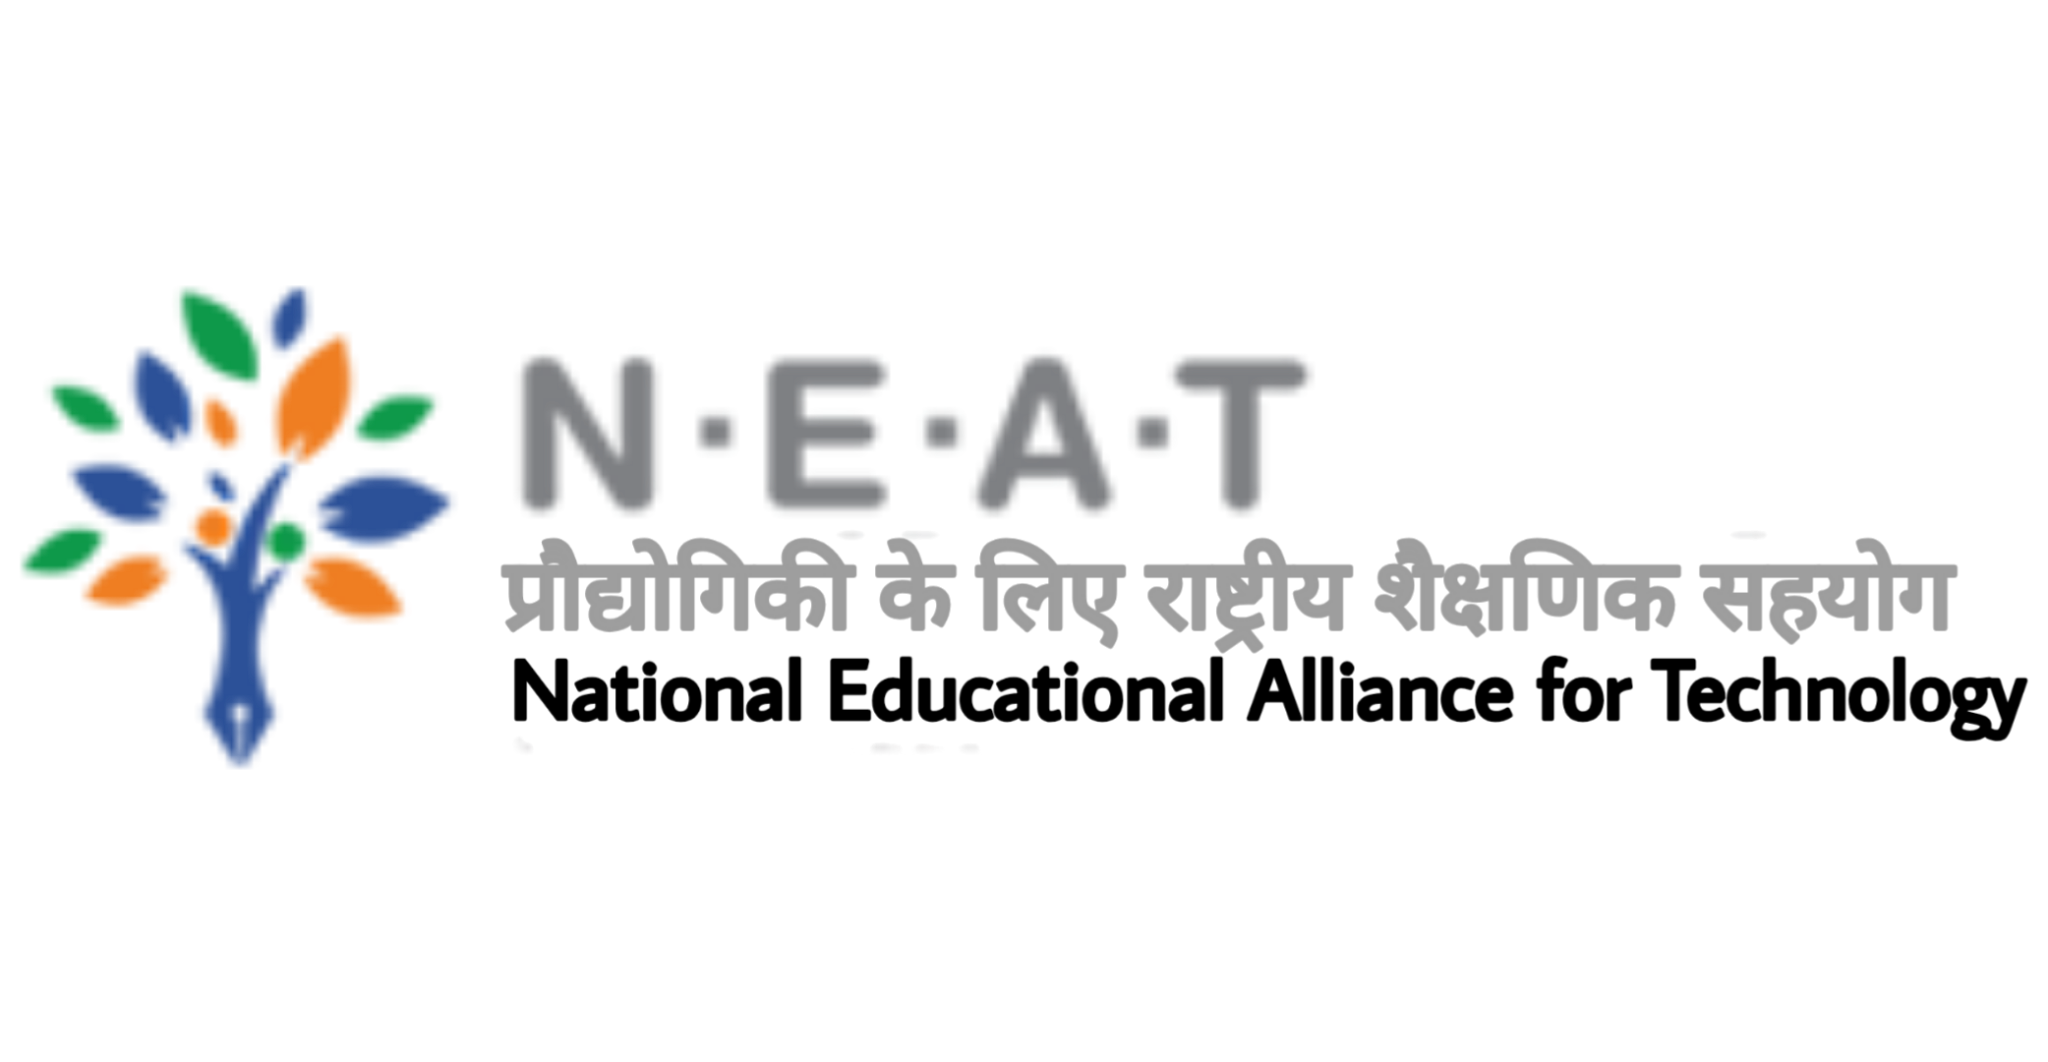 What Is National Educational Alliance For Technology (NEAT) Scheme?￼